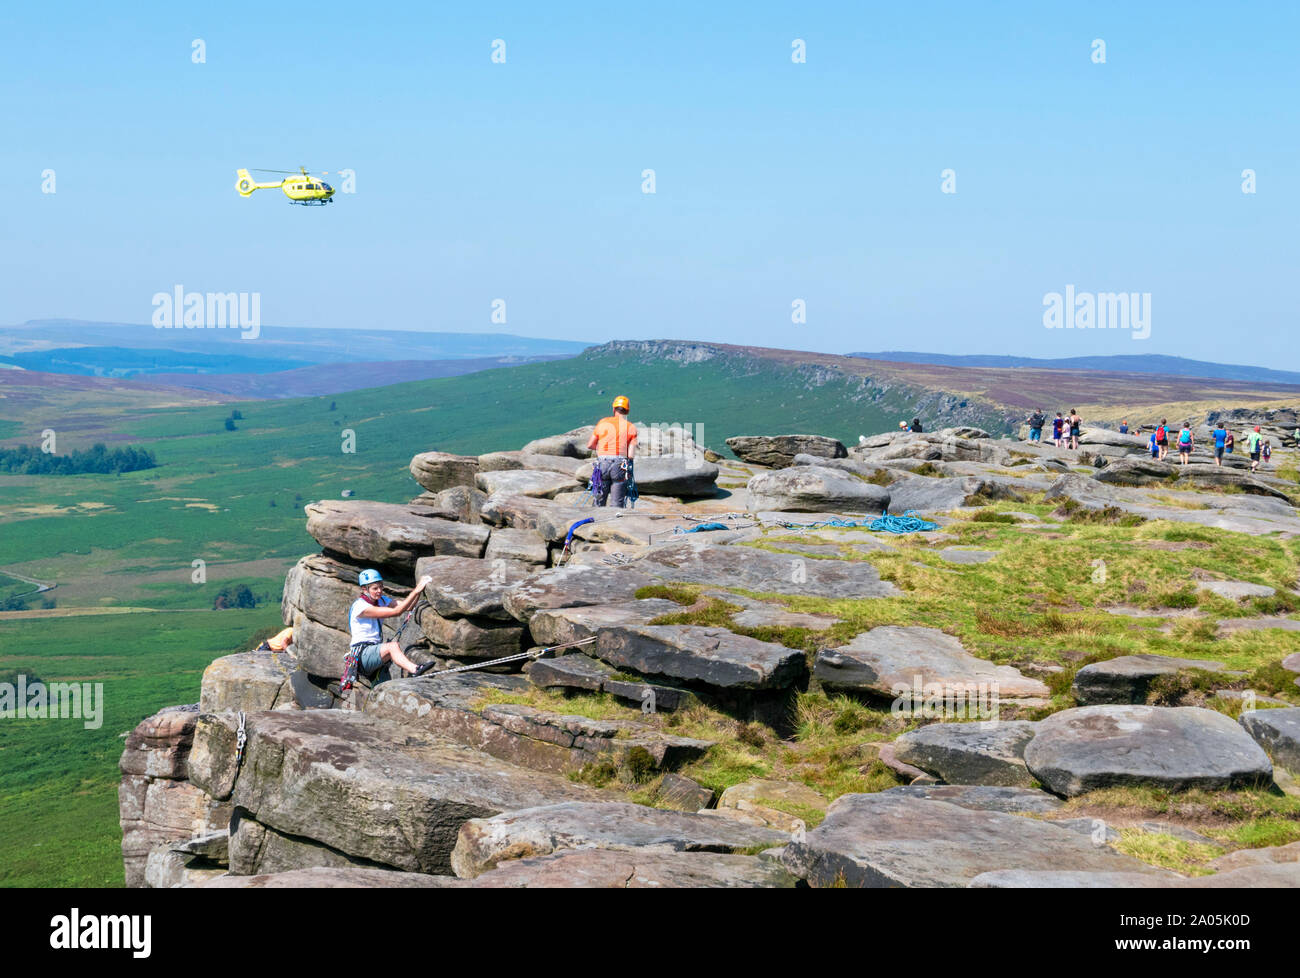 Air ambulance helicopter in rescue drill practice drill Stanage edge Peak district National park Derbyshire England UK GB Europe Stock Photo